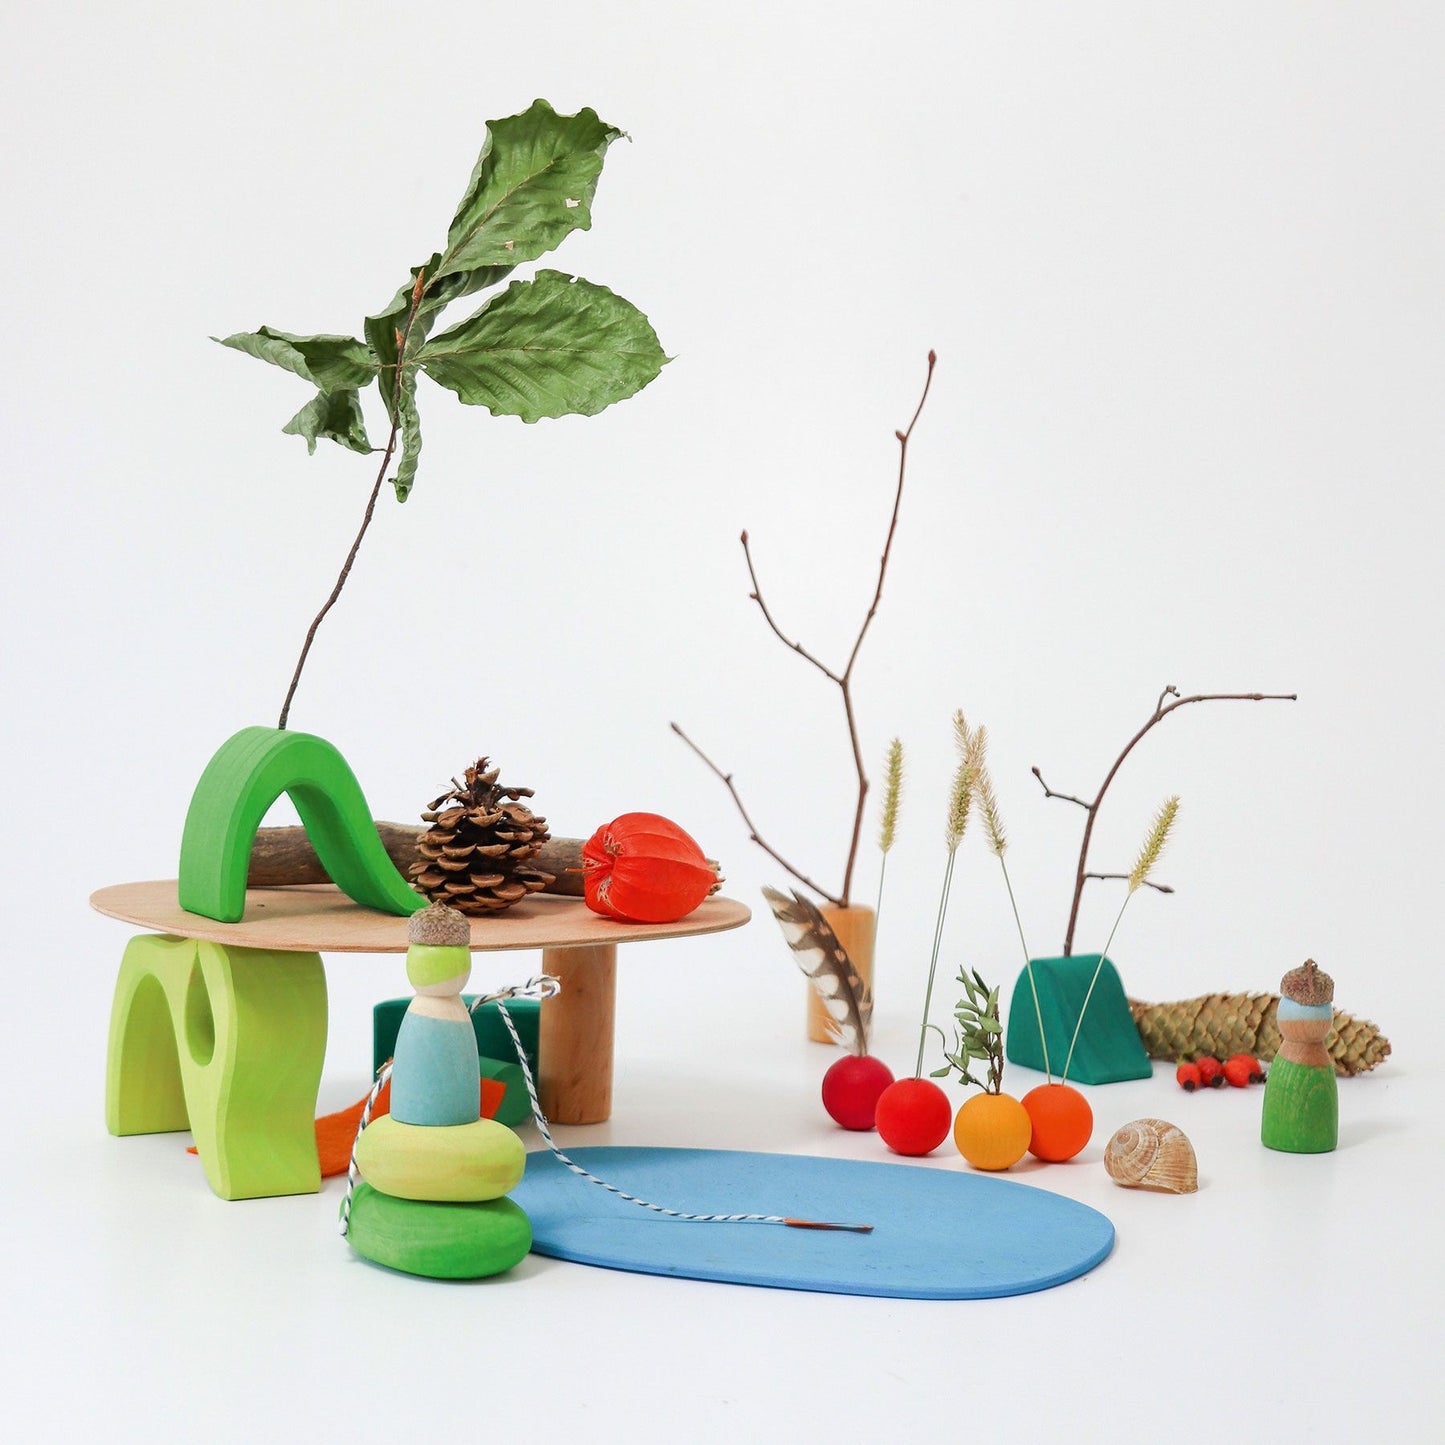 Play in the Woods | Small World Playset | Wooden Toys for Kids | Open-Ended Play